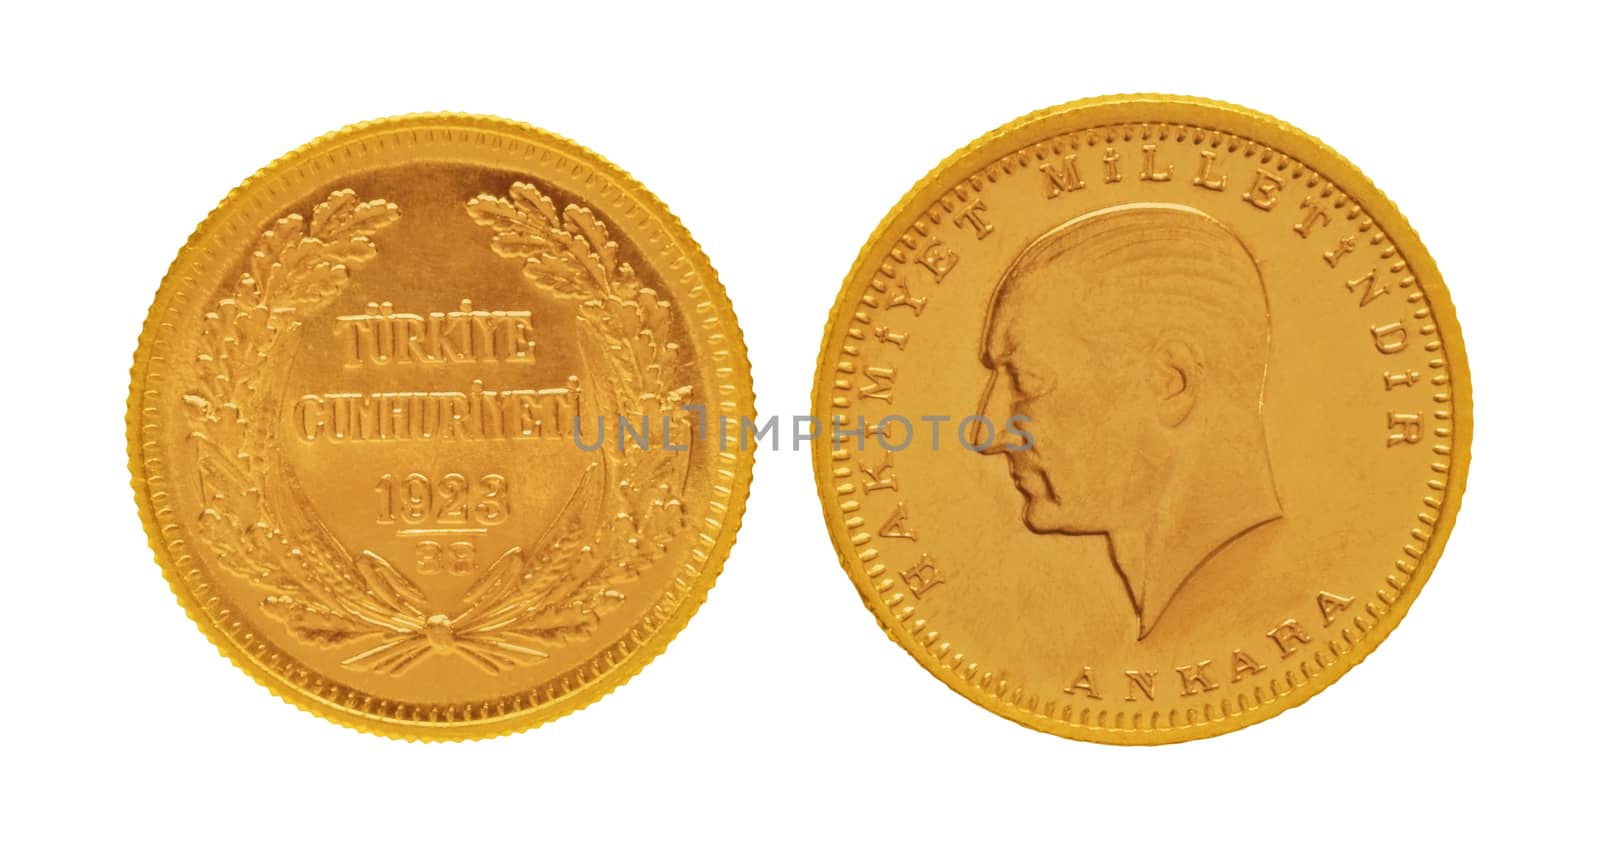 One hundred Kurush gold turkish coin. Isolated with path on white background